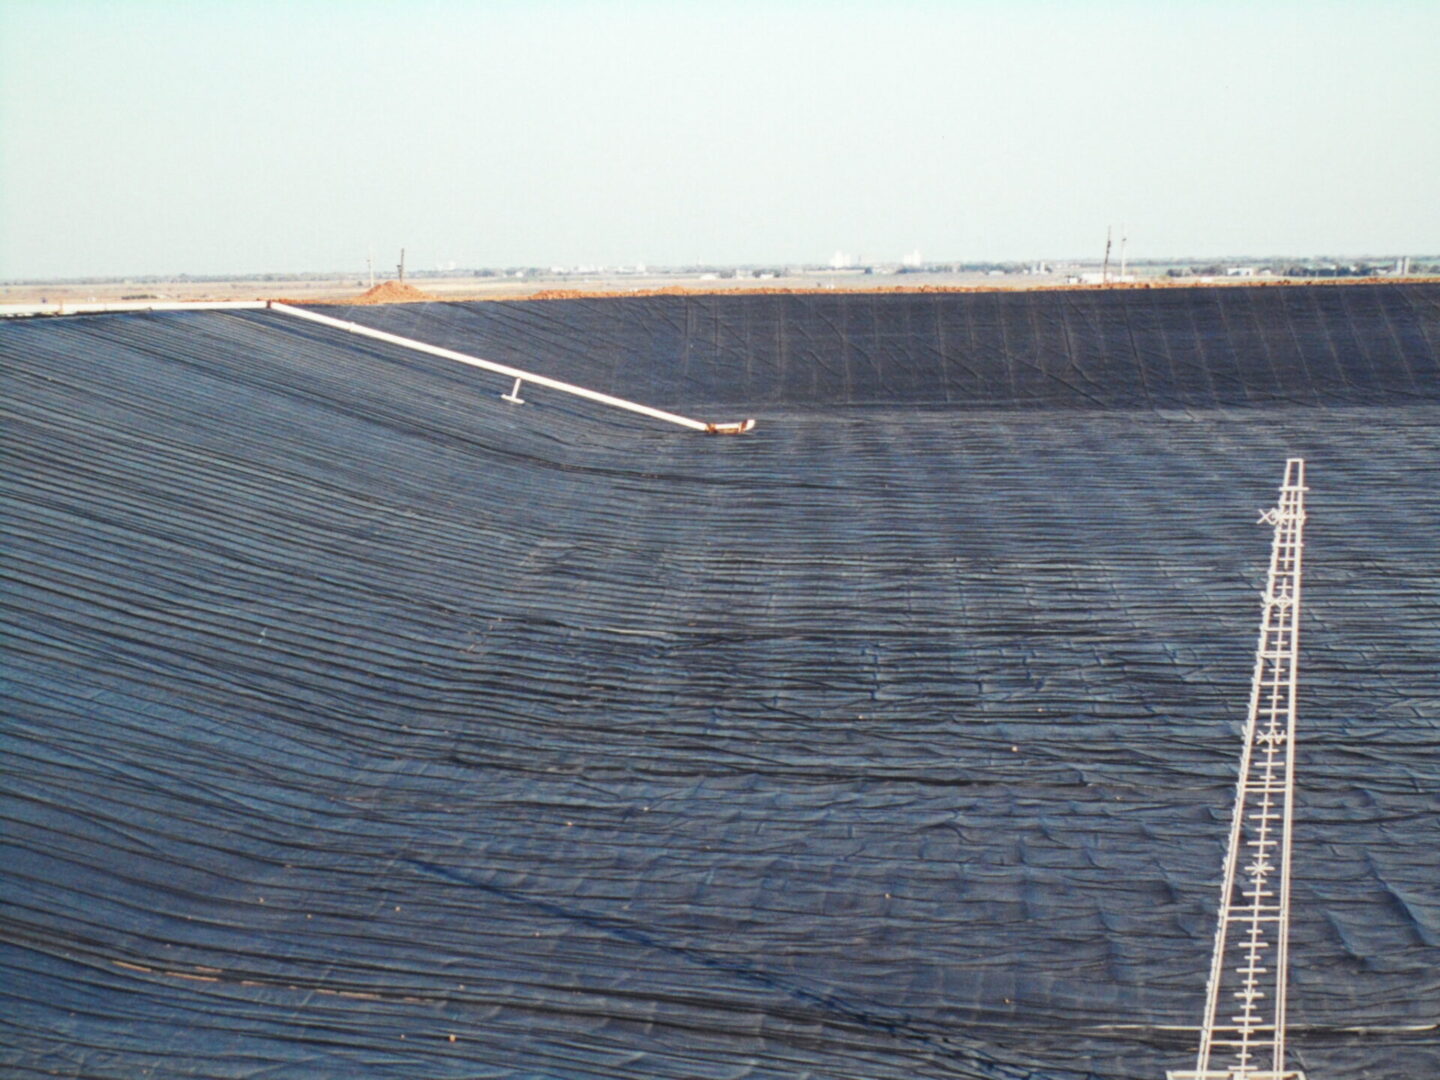 A large area of water with black tarps covering the ground.